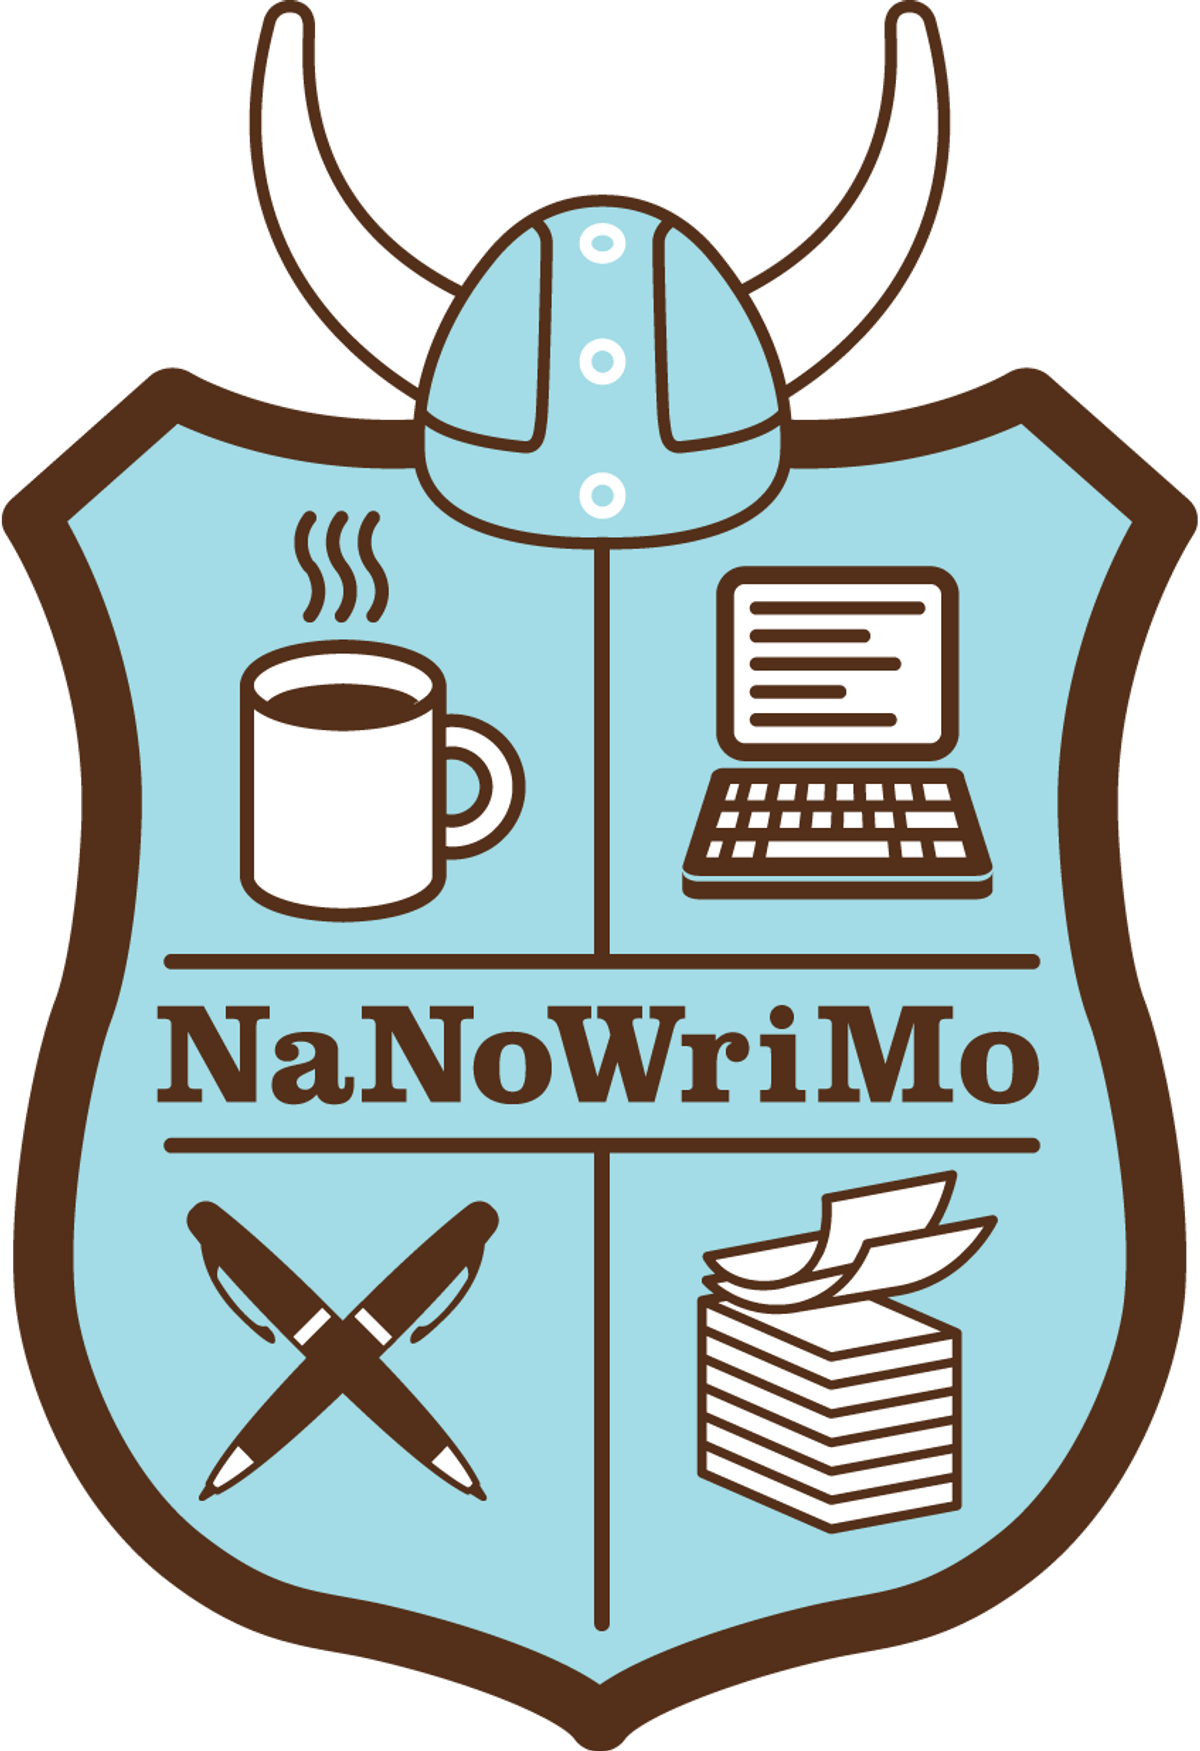 Some Tips for NaNoWriMo